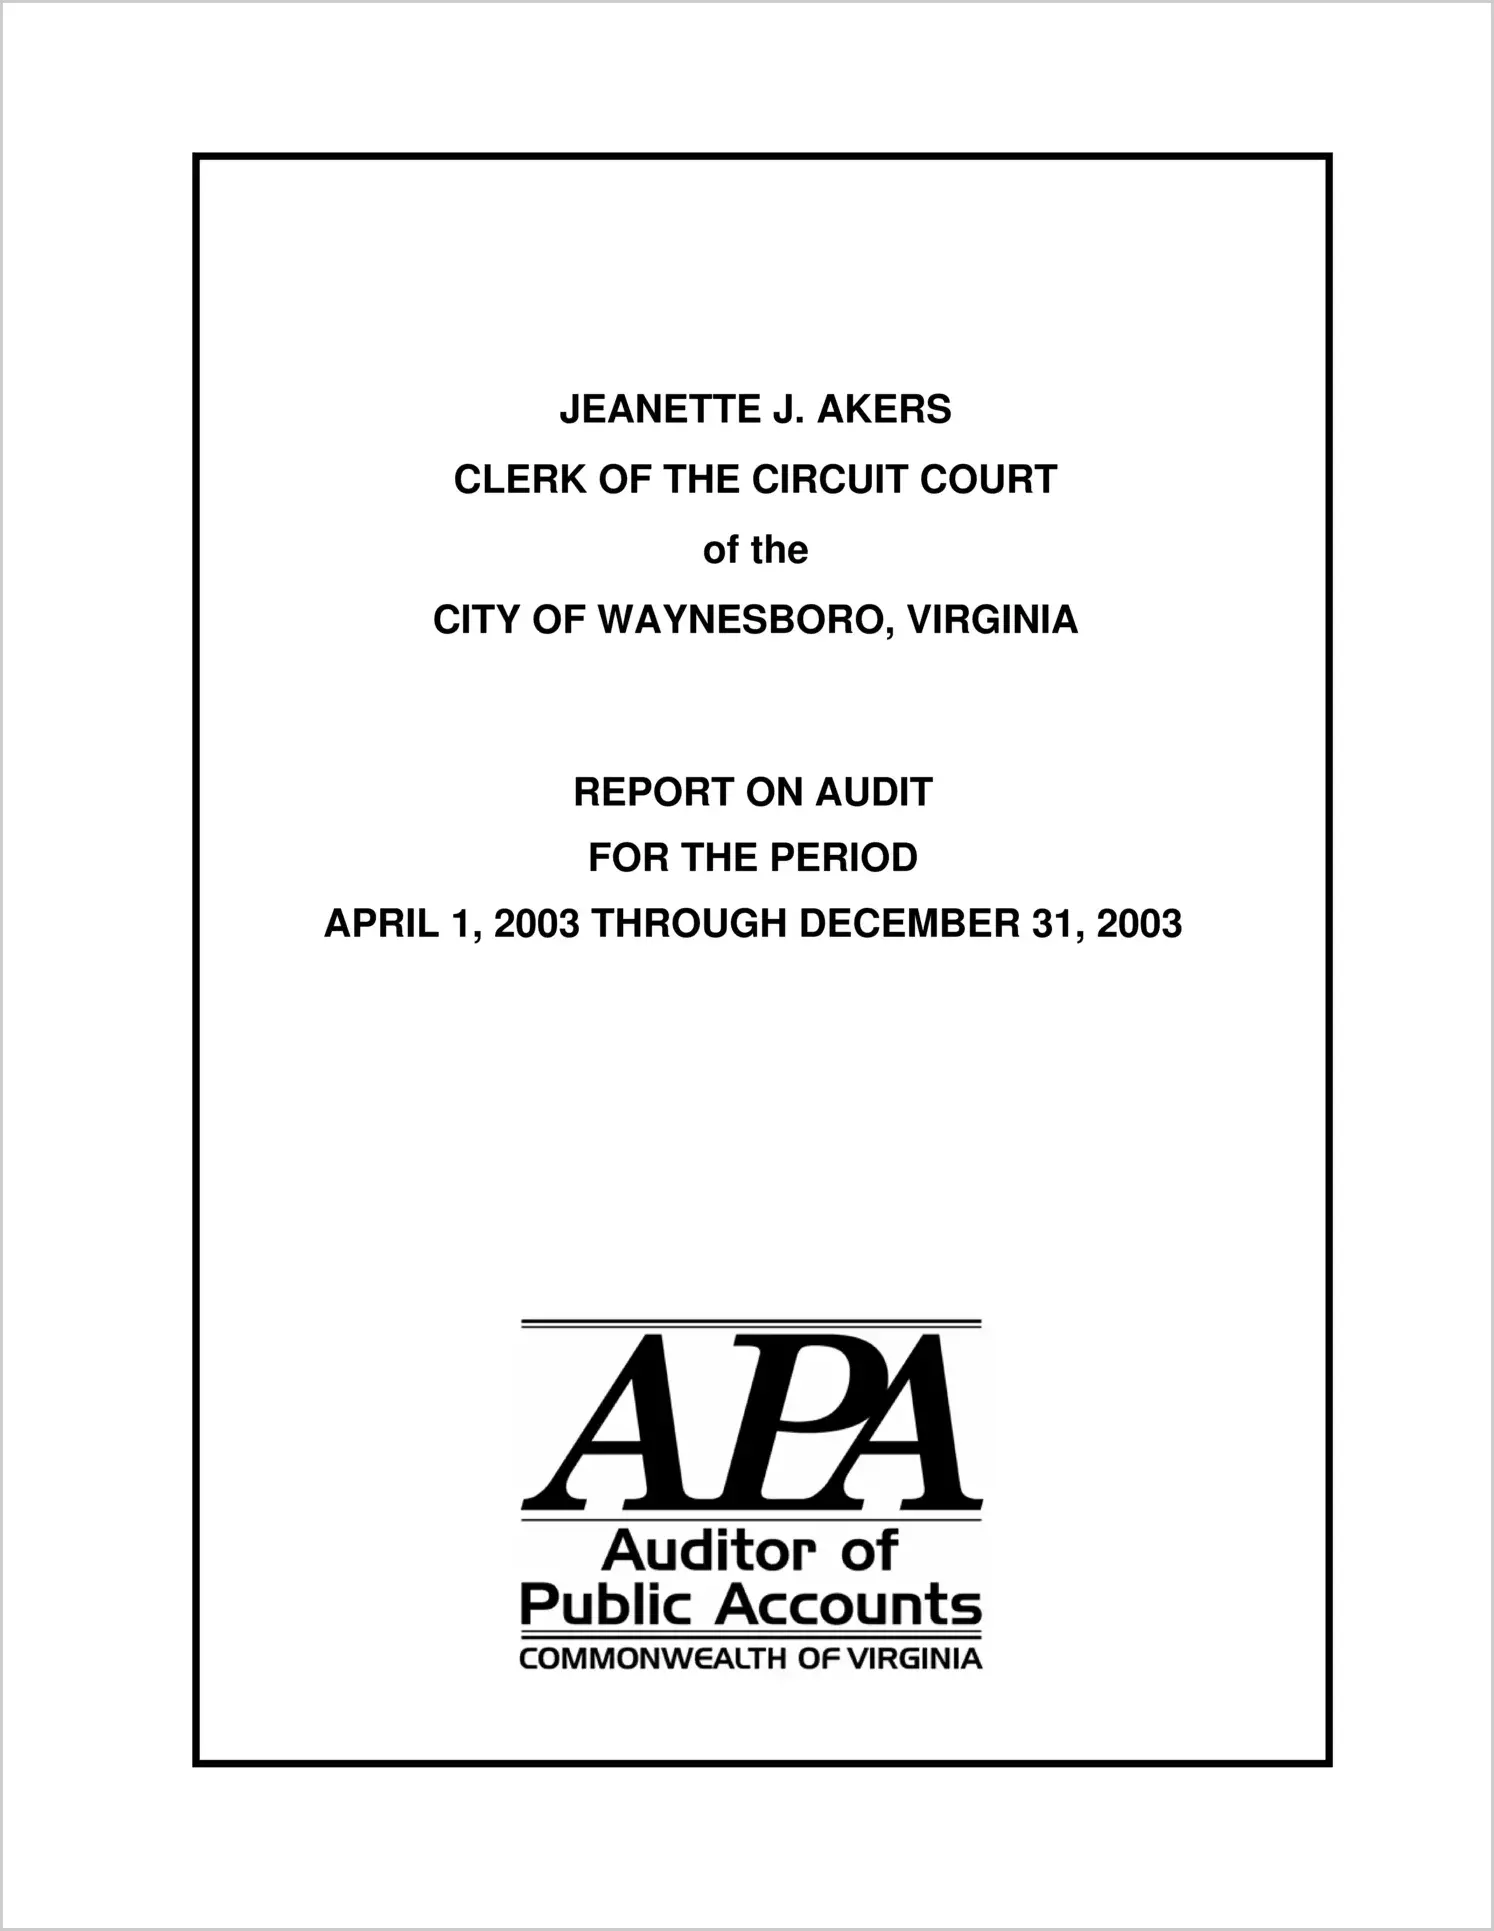 Clerk of the Circuit Court of the City of Waynesboro for the period April 1, 2003 through December 31, 2003